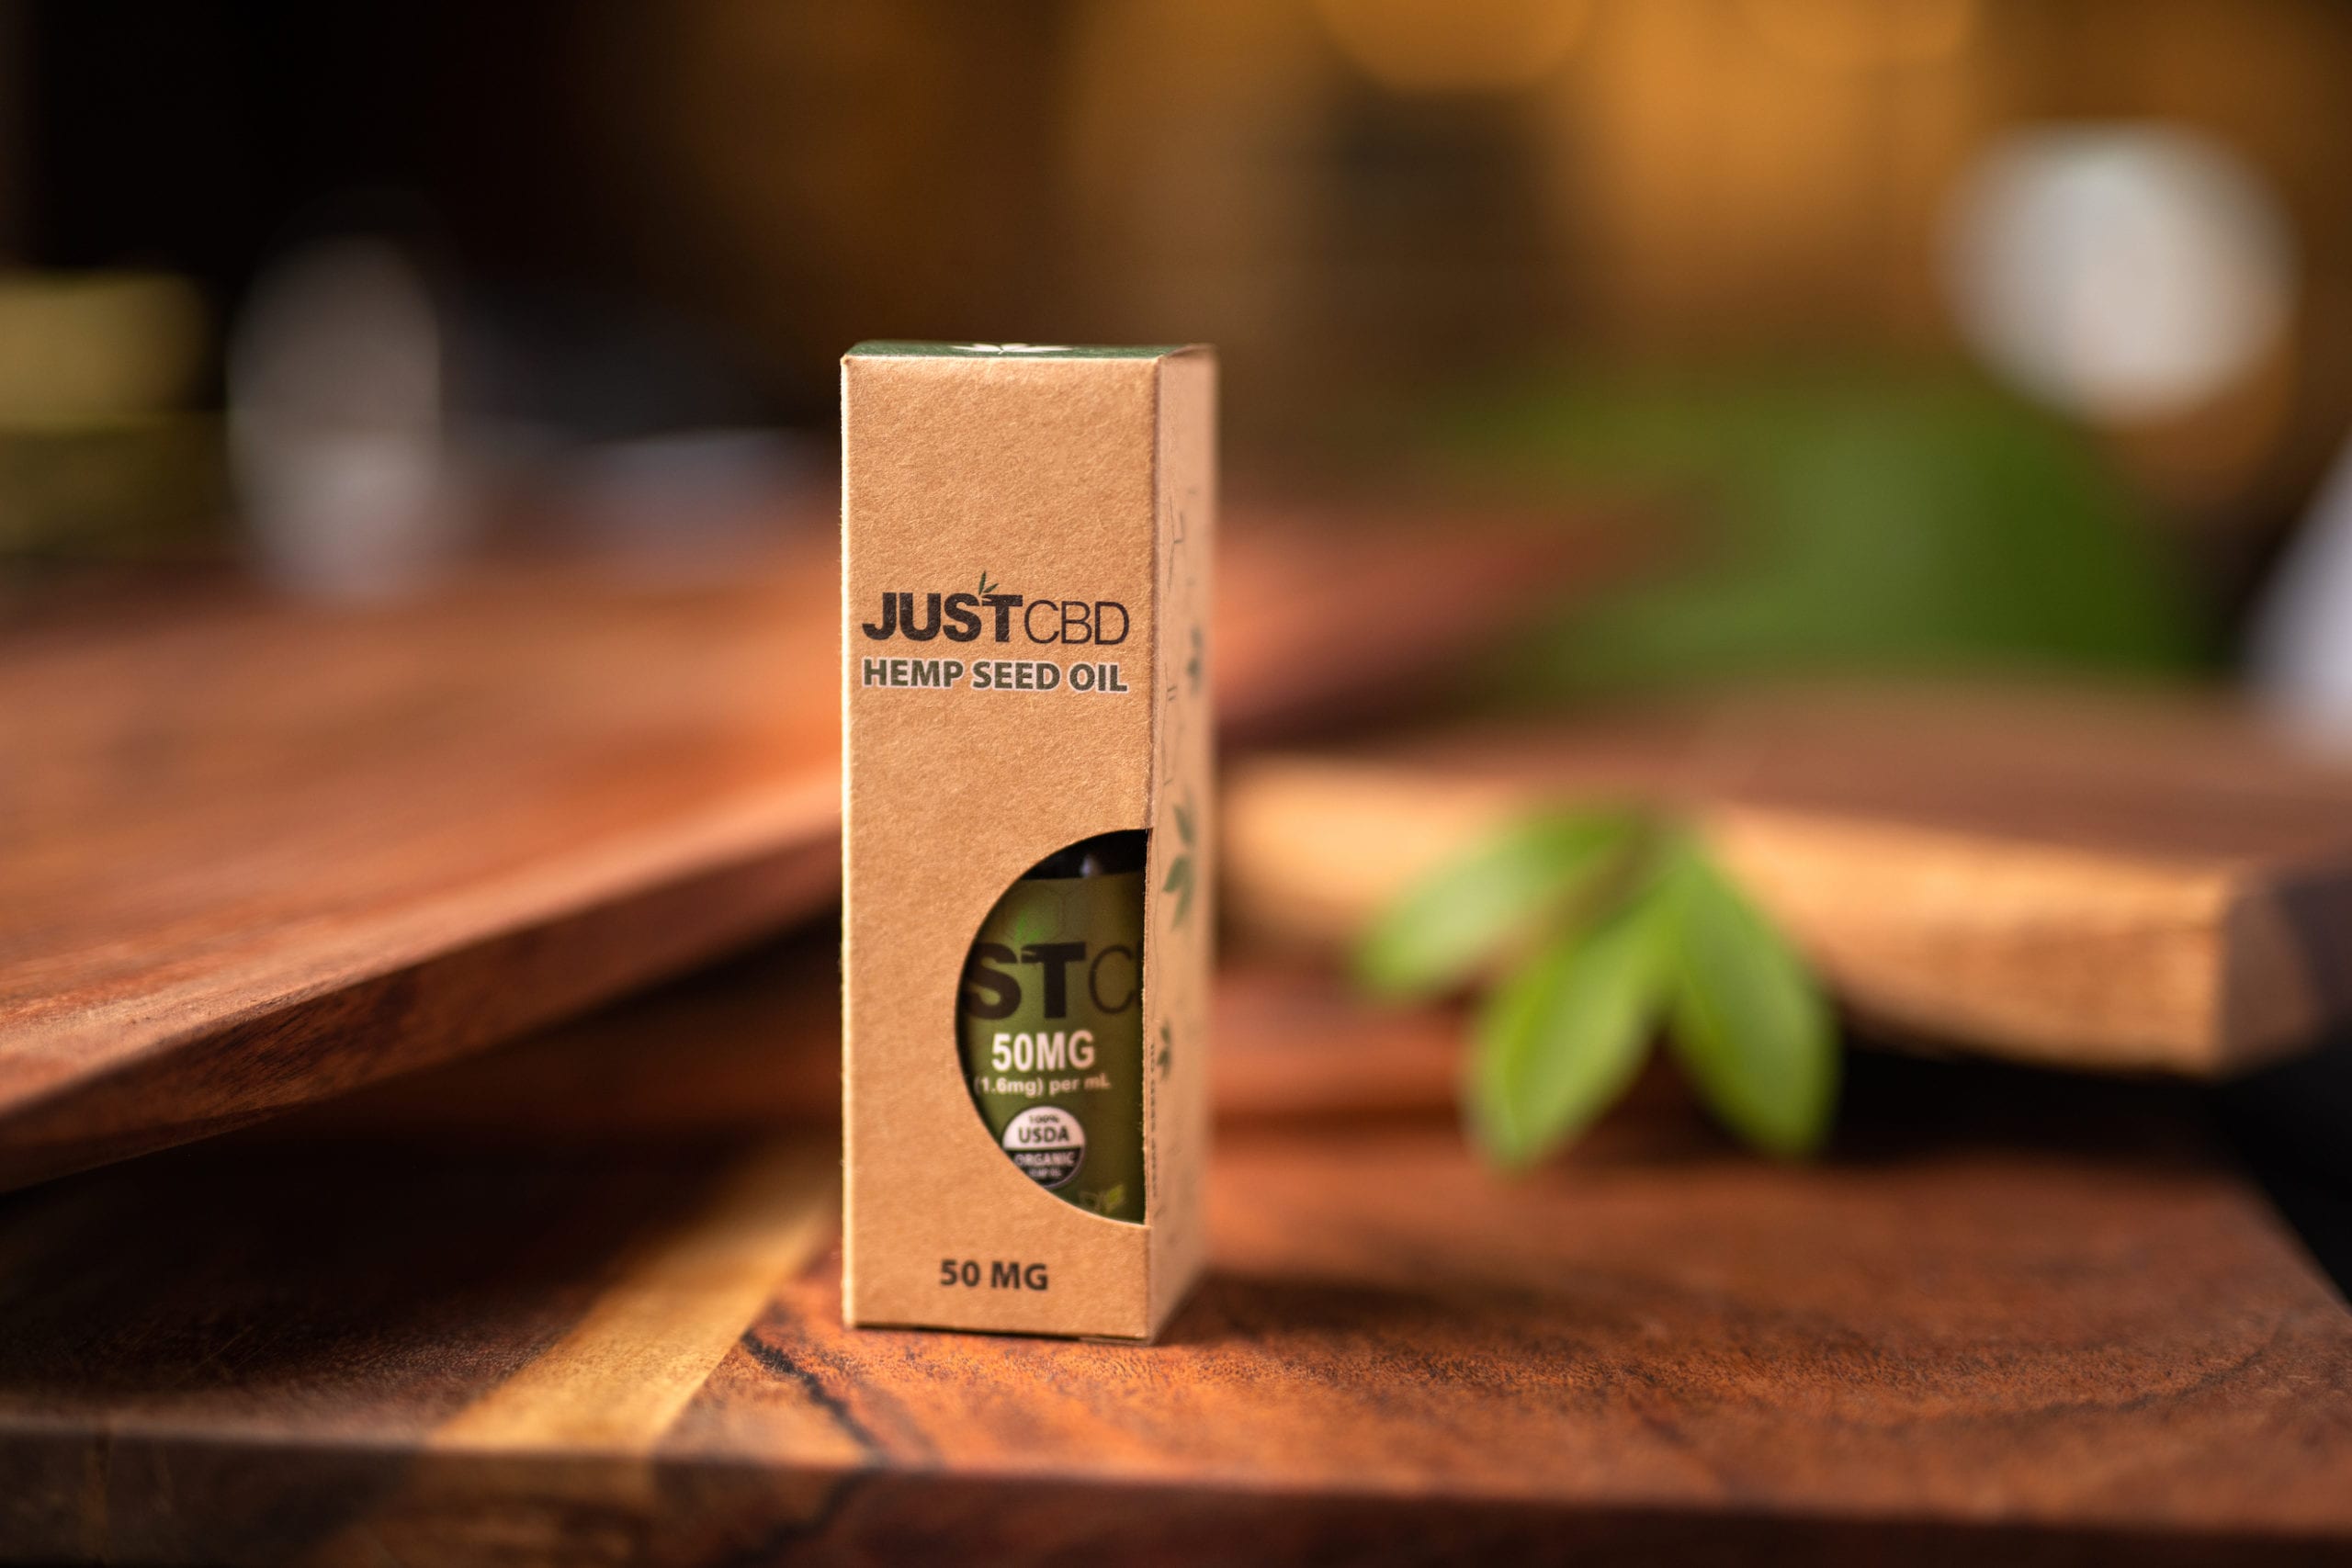 IU C&I Studios Portfolio JustCBD Product Photography and JustCBD Products JustCBD Hemp Seed Oil container on display on a wooden table